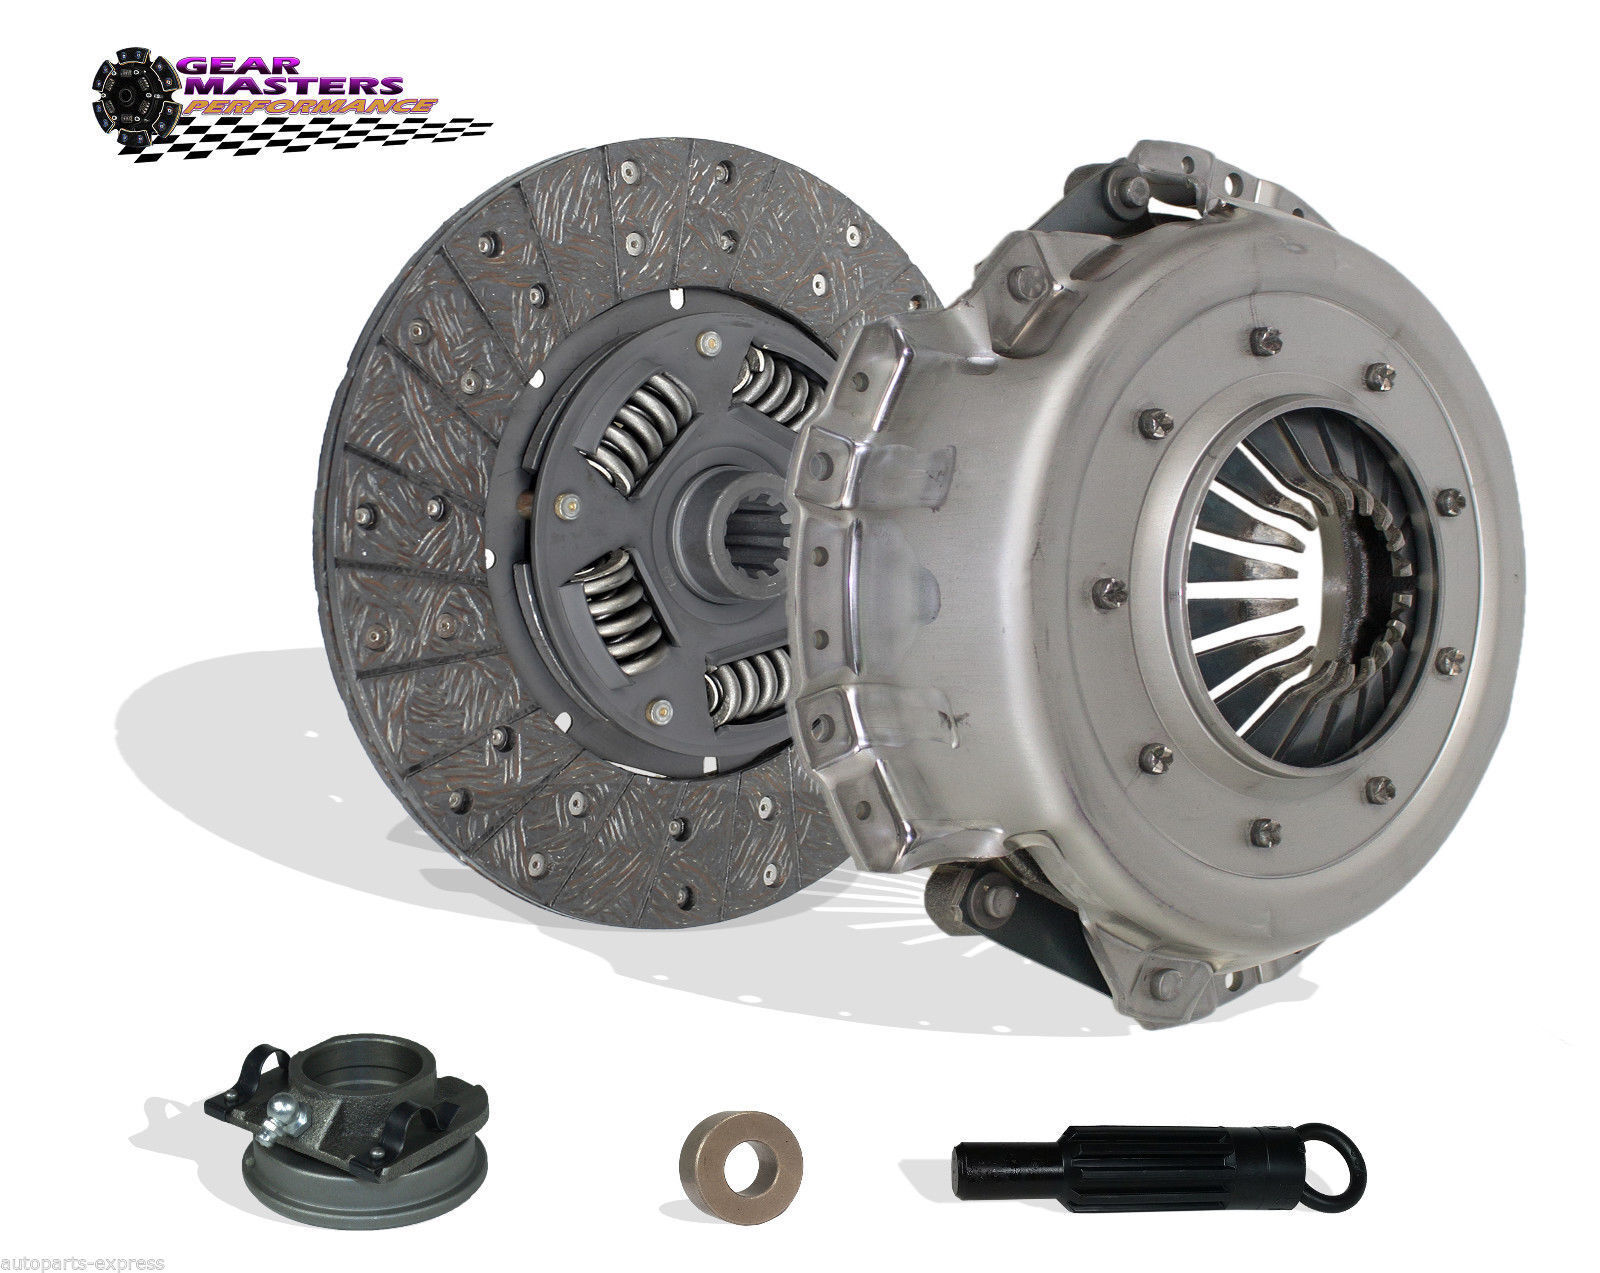 CLUTCH KIT GEAR MASTERS FOR FORD MUSTANG CUSTOM 300 MERCURY COMET COUGAR CYCLONE